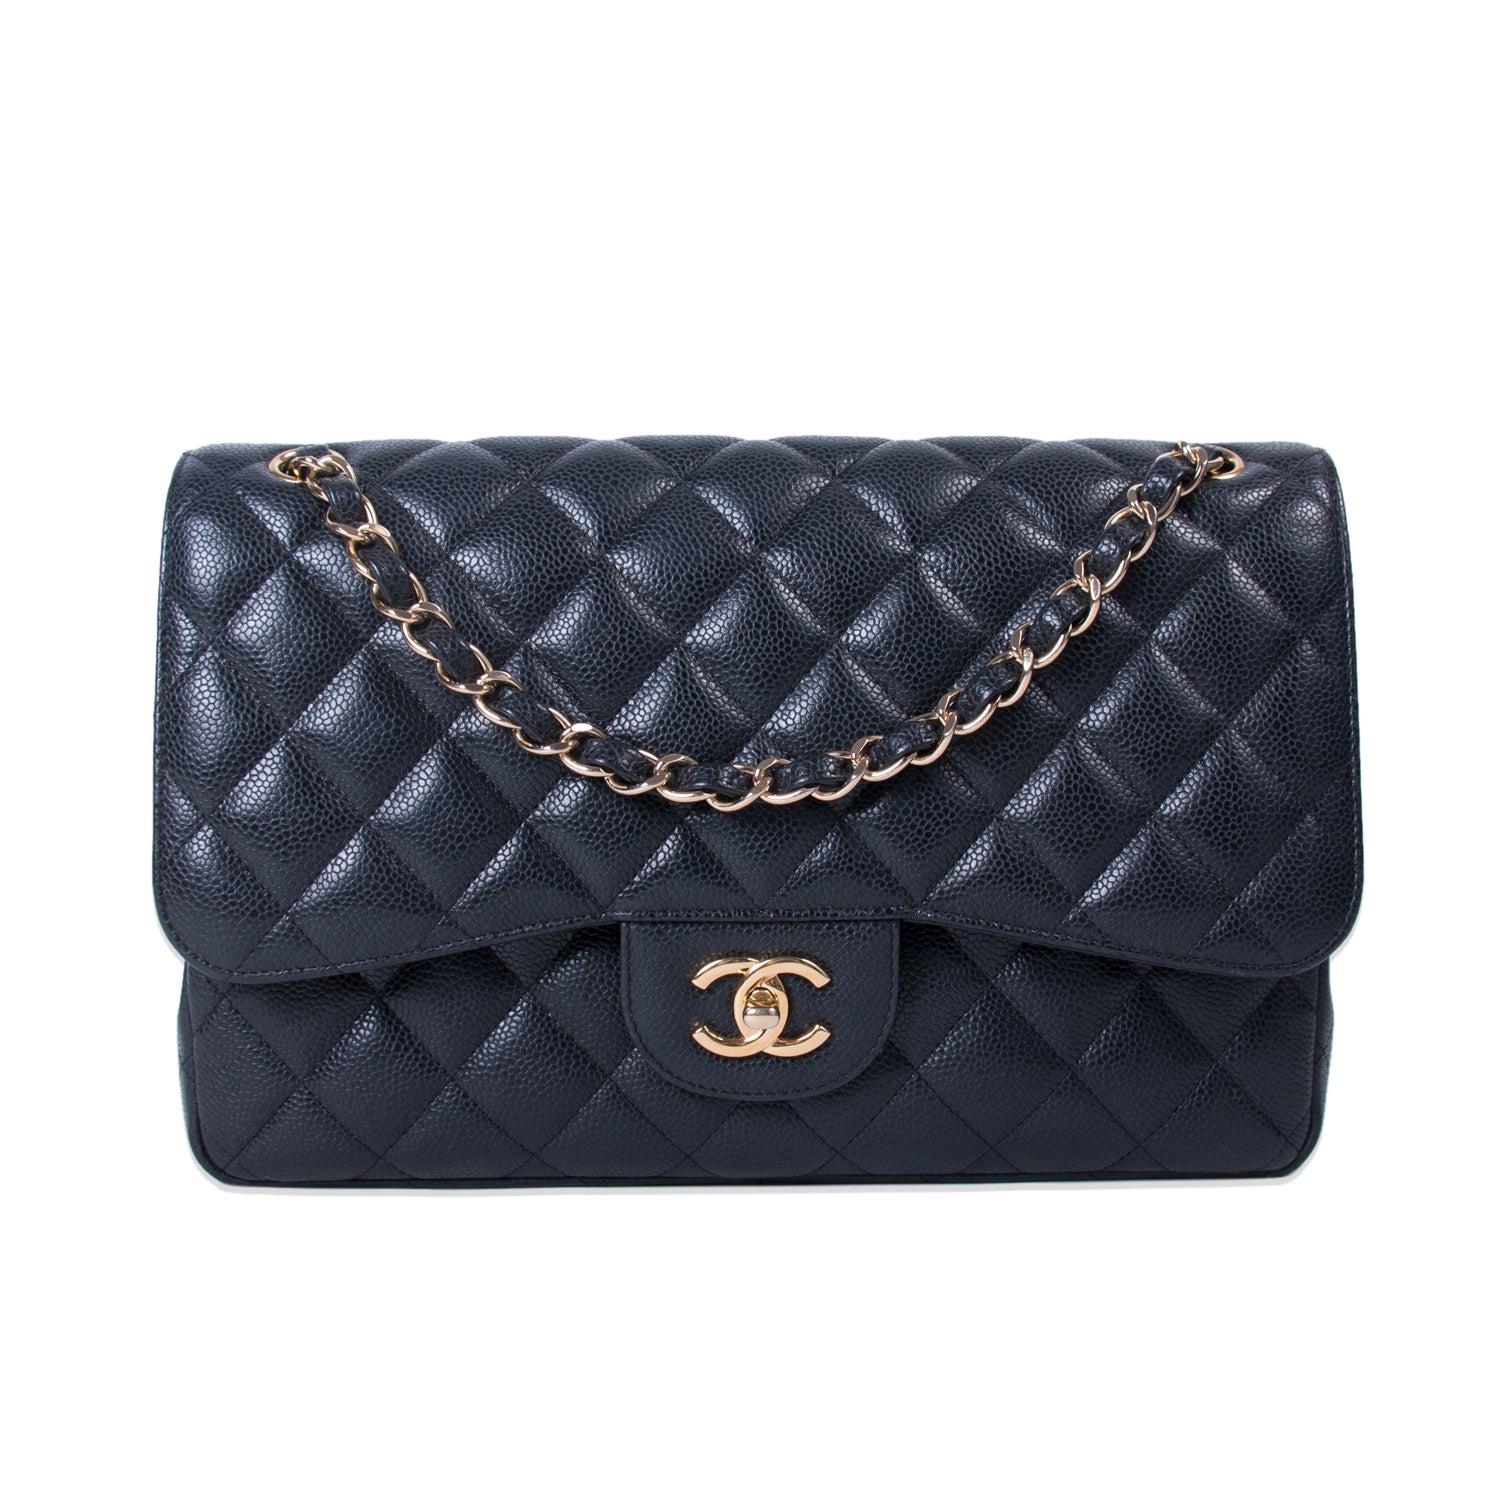 Shop authentic Chanel Classic Jumbo Double Flap Bag at revogue for just ...